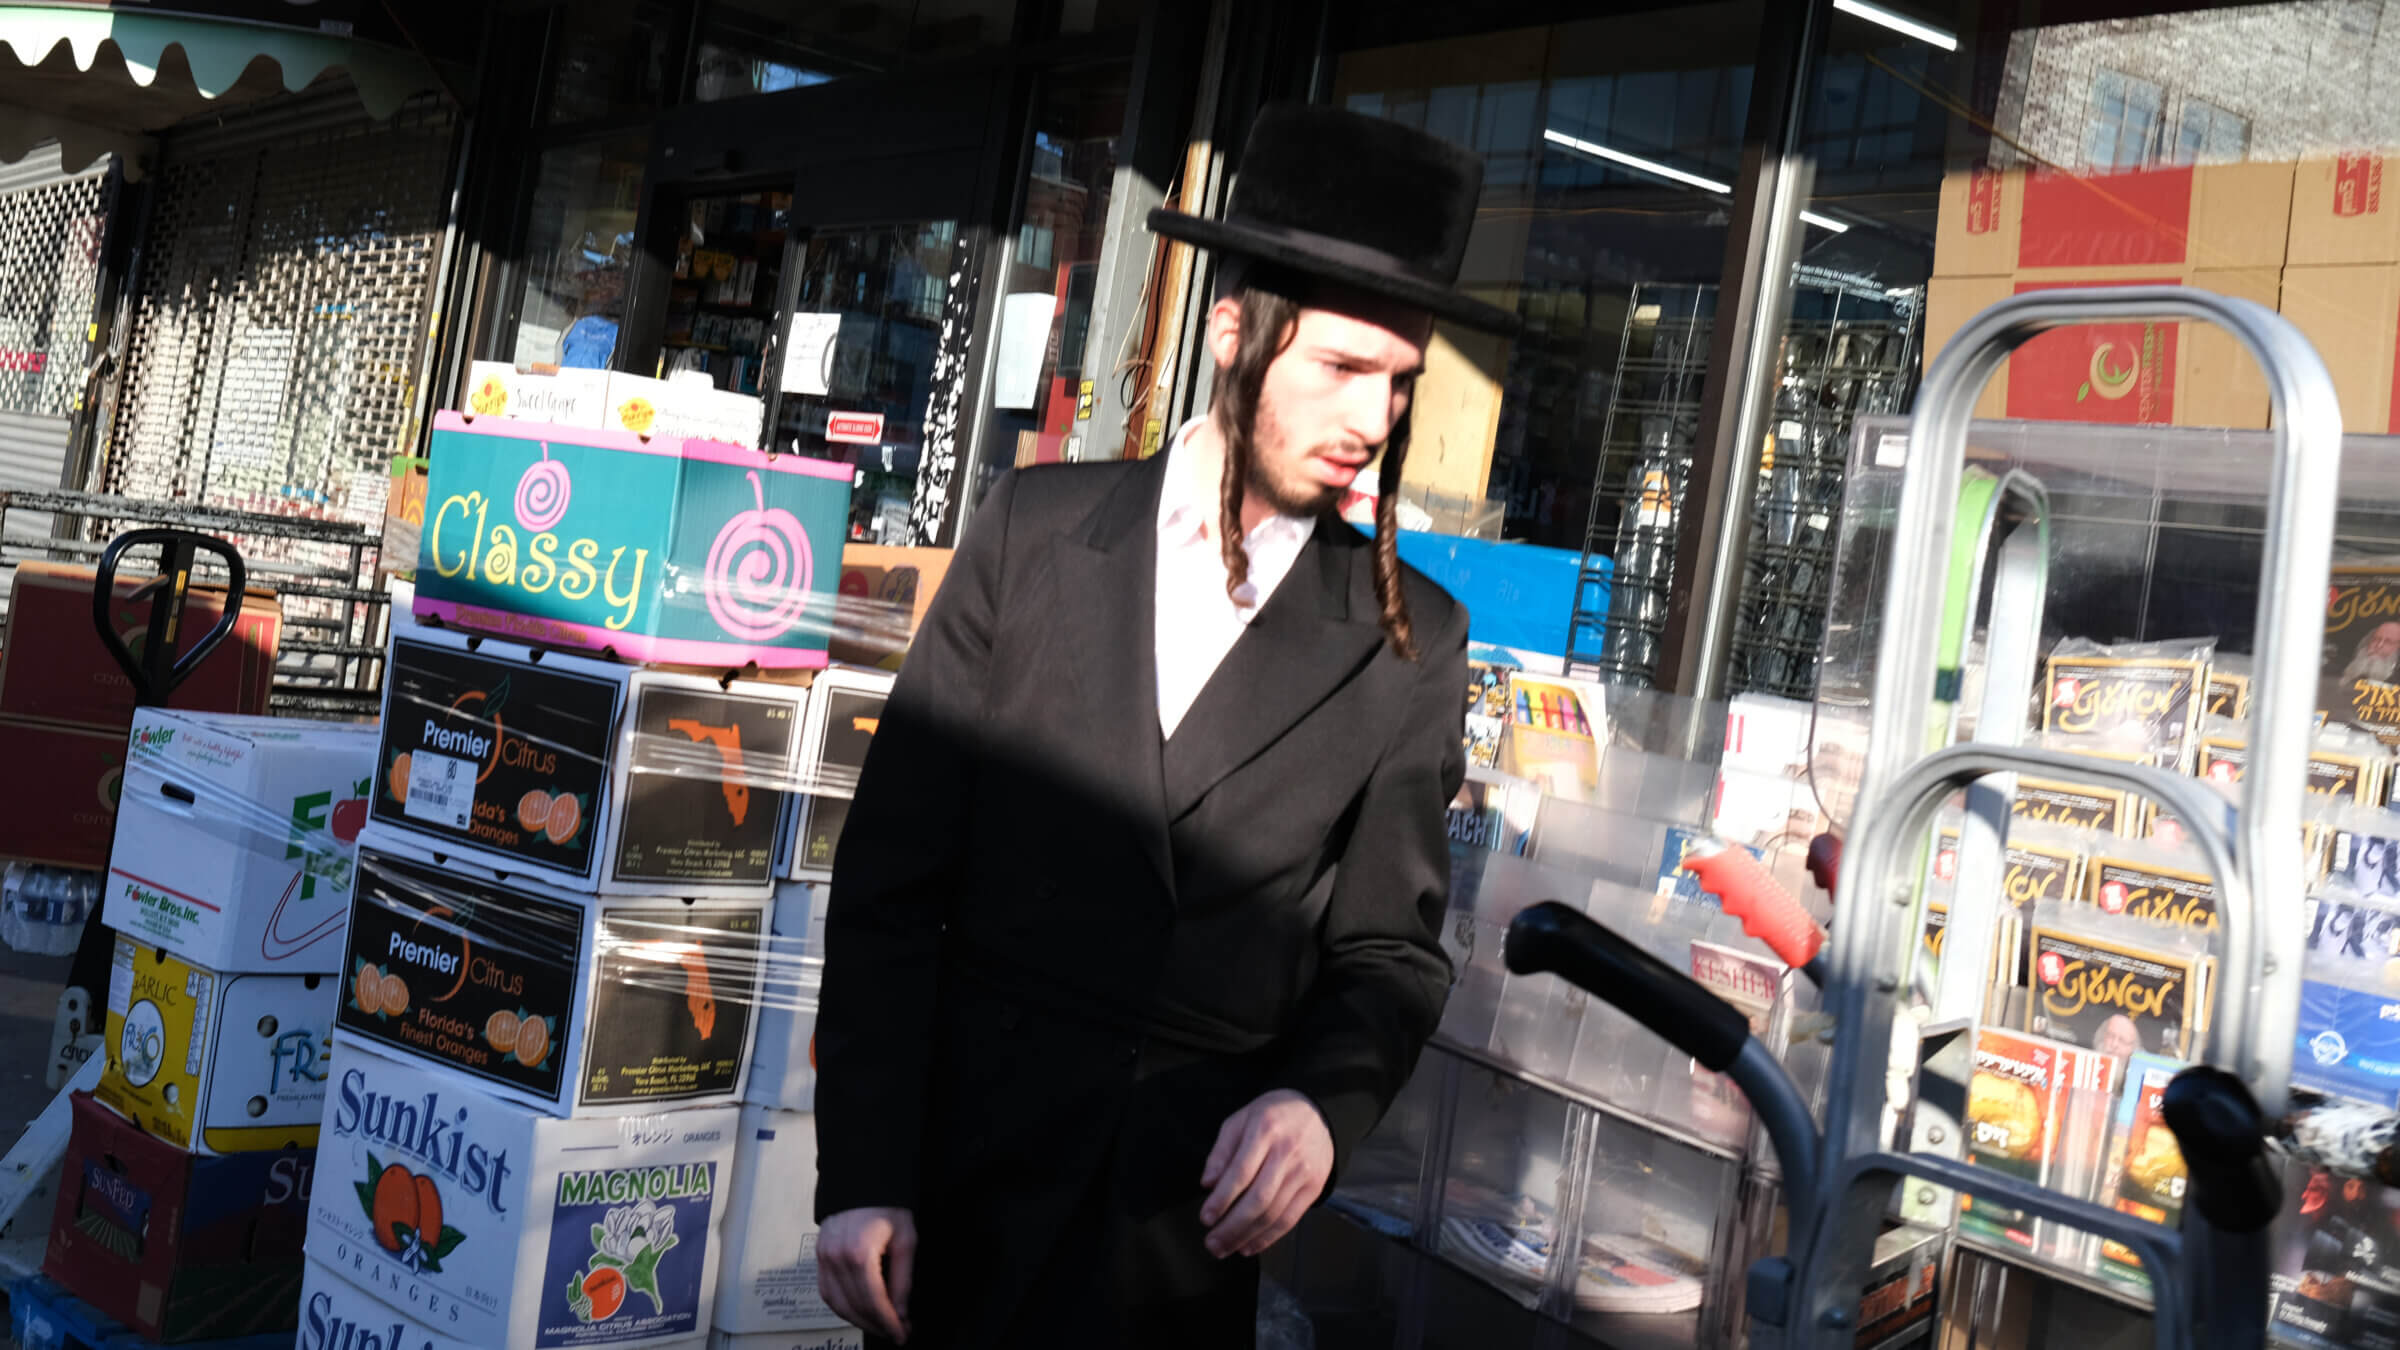 A man walks by a newsstand in the Borough Park neighborhood of Brooklyn. <i>Shtetl</i>, a new online publication, seeks to provide "independent" coverage of the Haredi community.